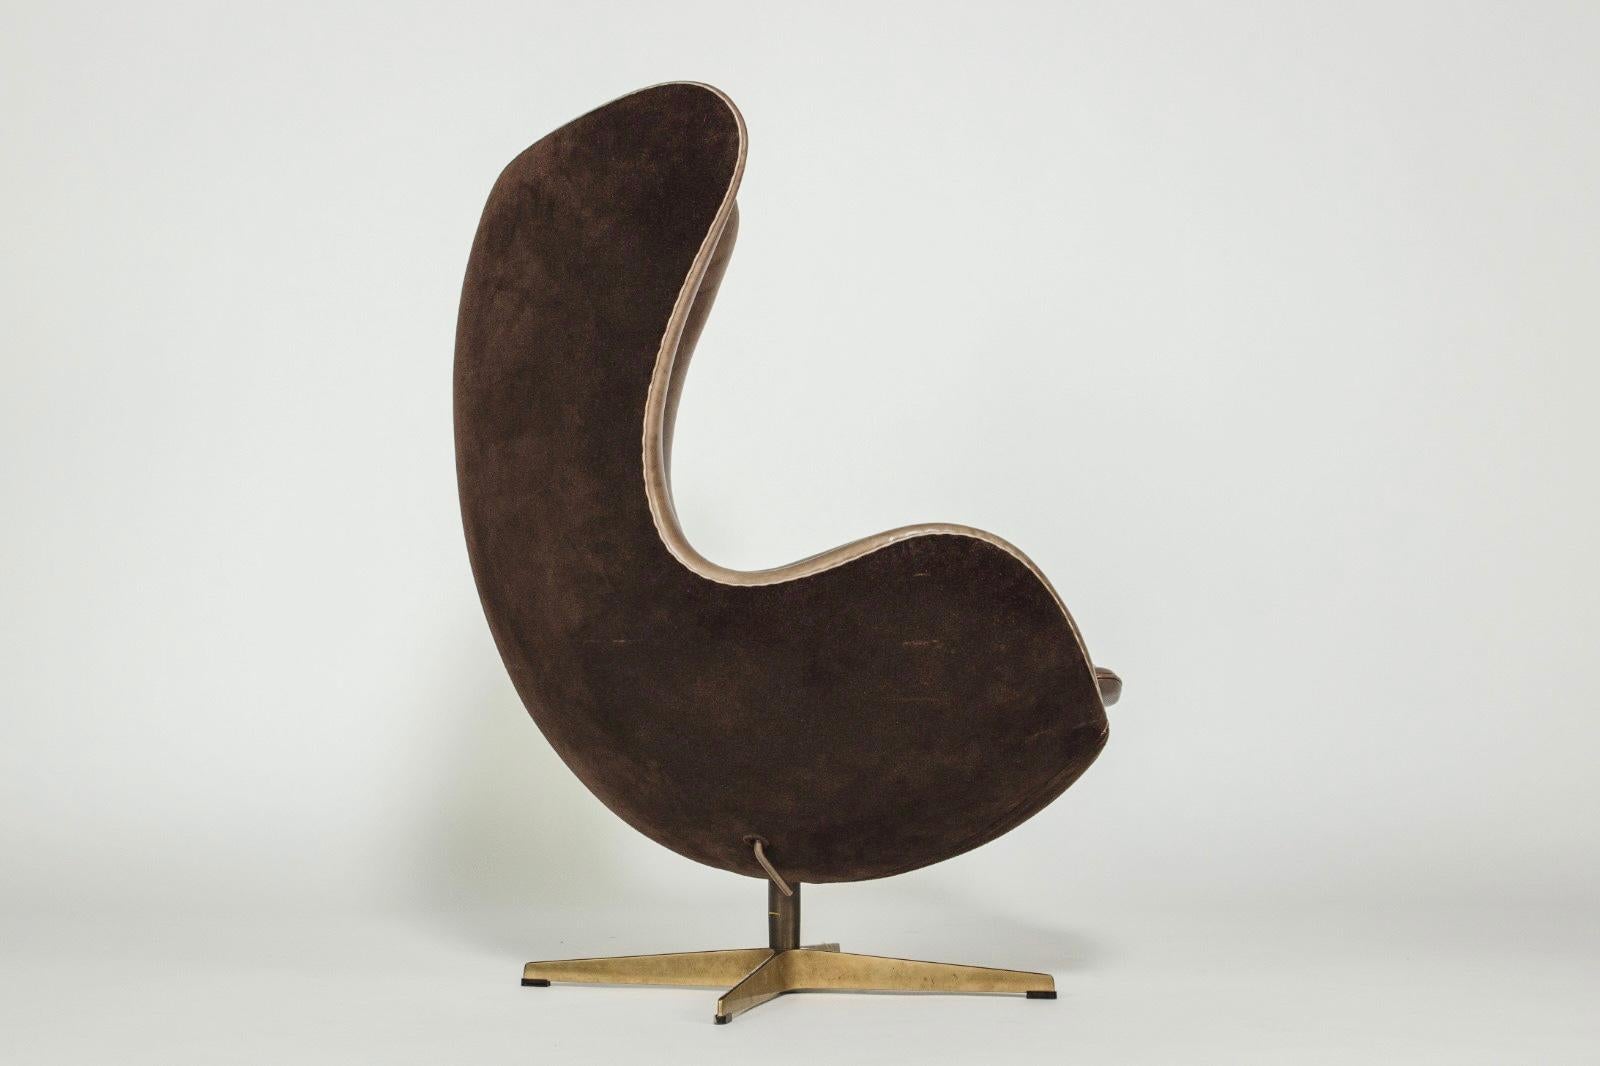 Arne Jacobsen. 'The Golden Egg' chair and footstool, models 3316 and 3127, Upholstered in dark-brown leather on the front and dark-brown suede on the back. Four-star base in solid hand-polished bronze.. Designed in 1958. Produced by Fritz Hansen in